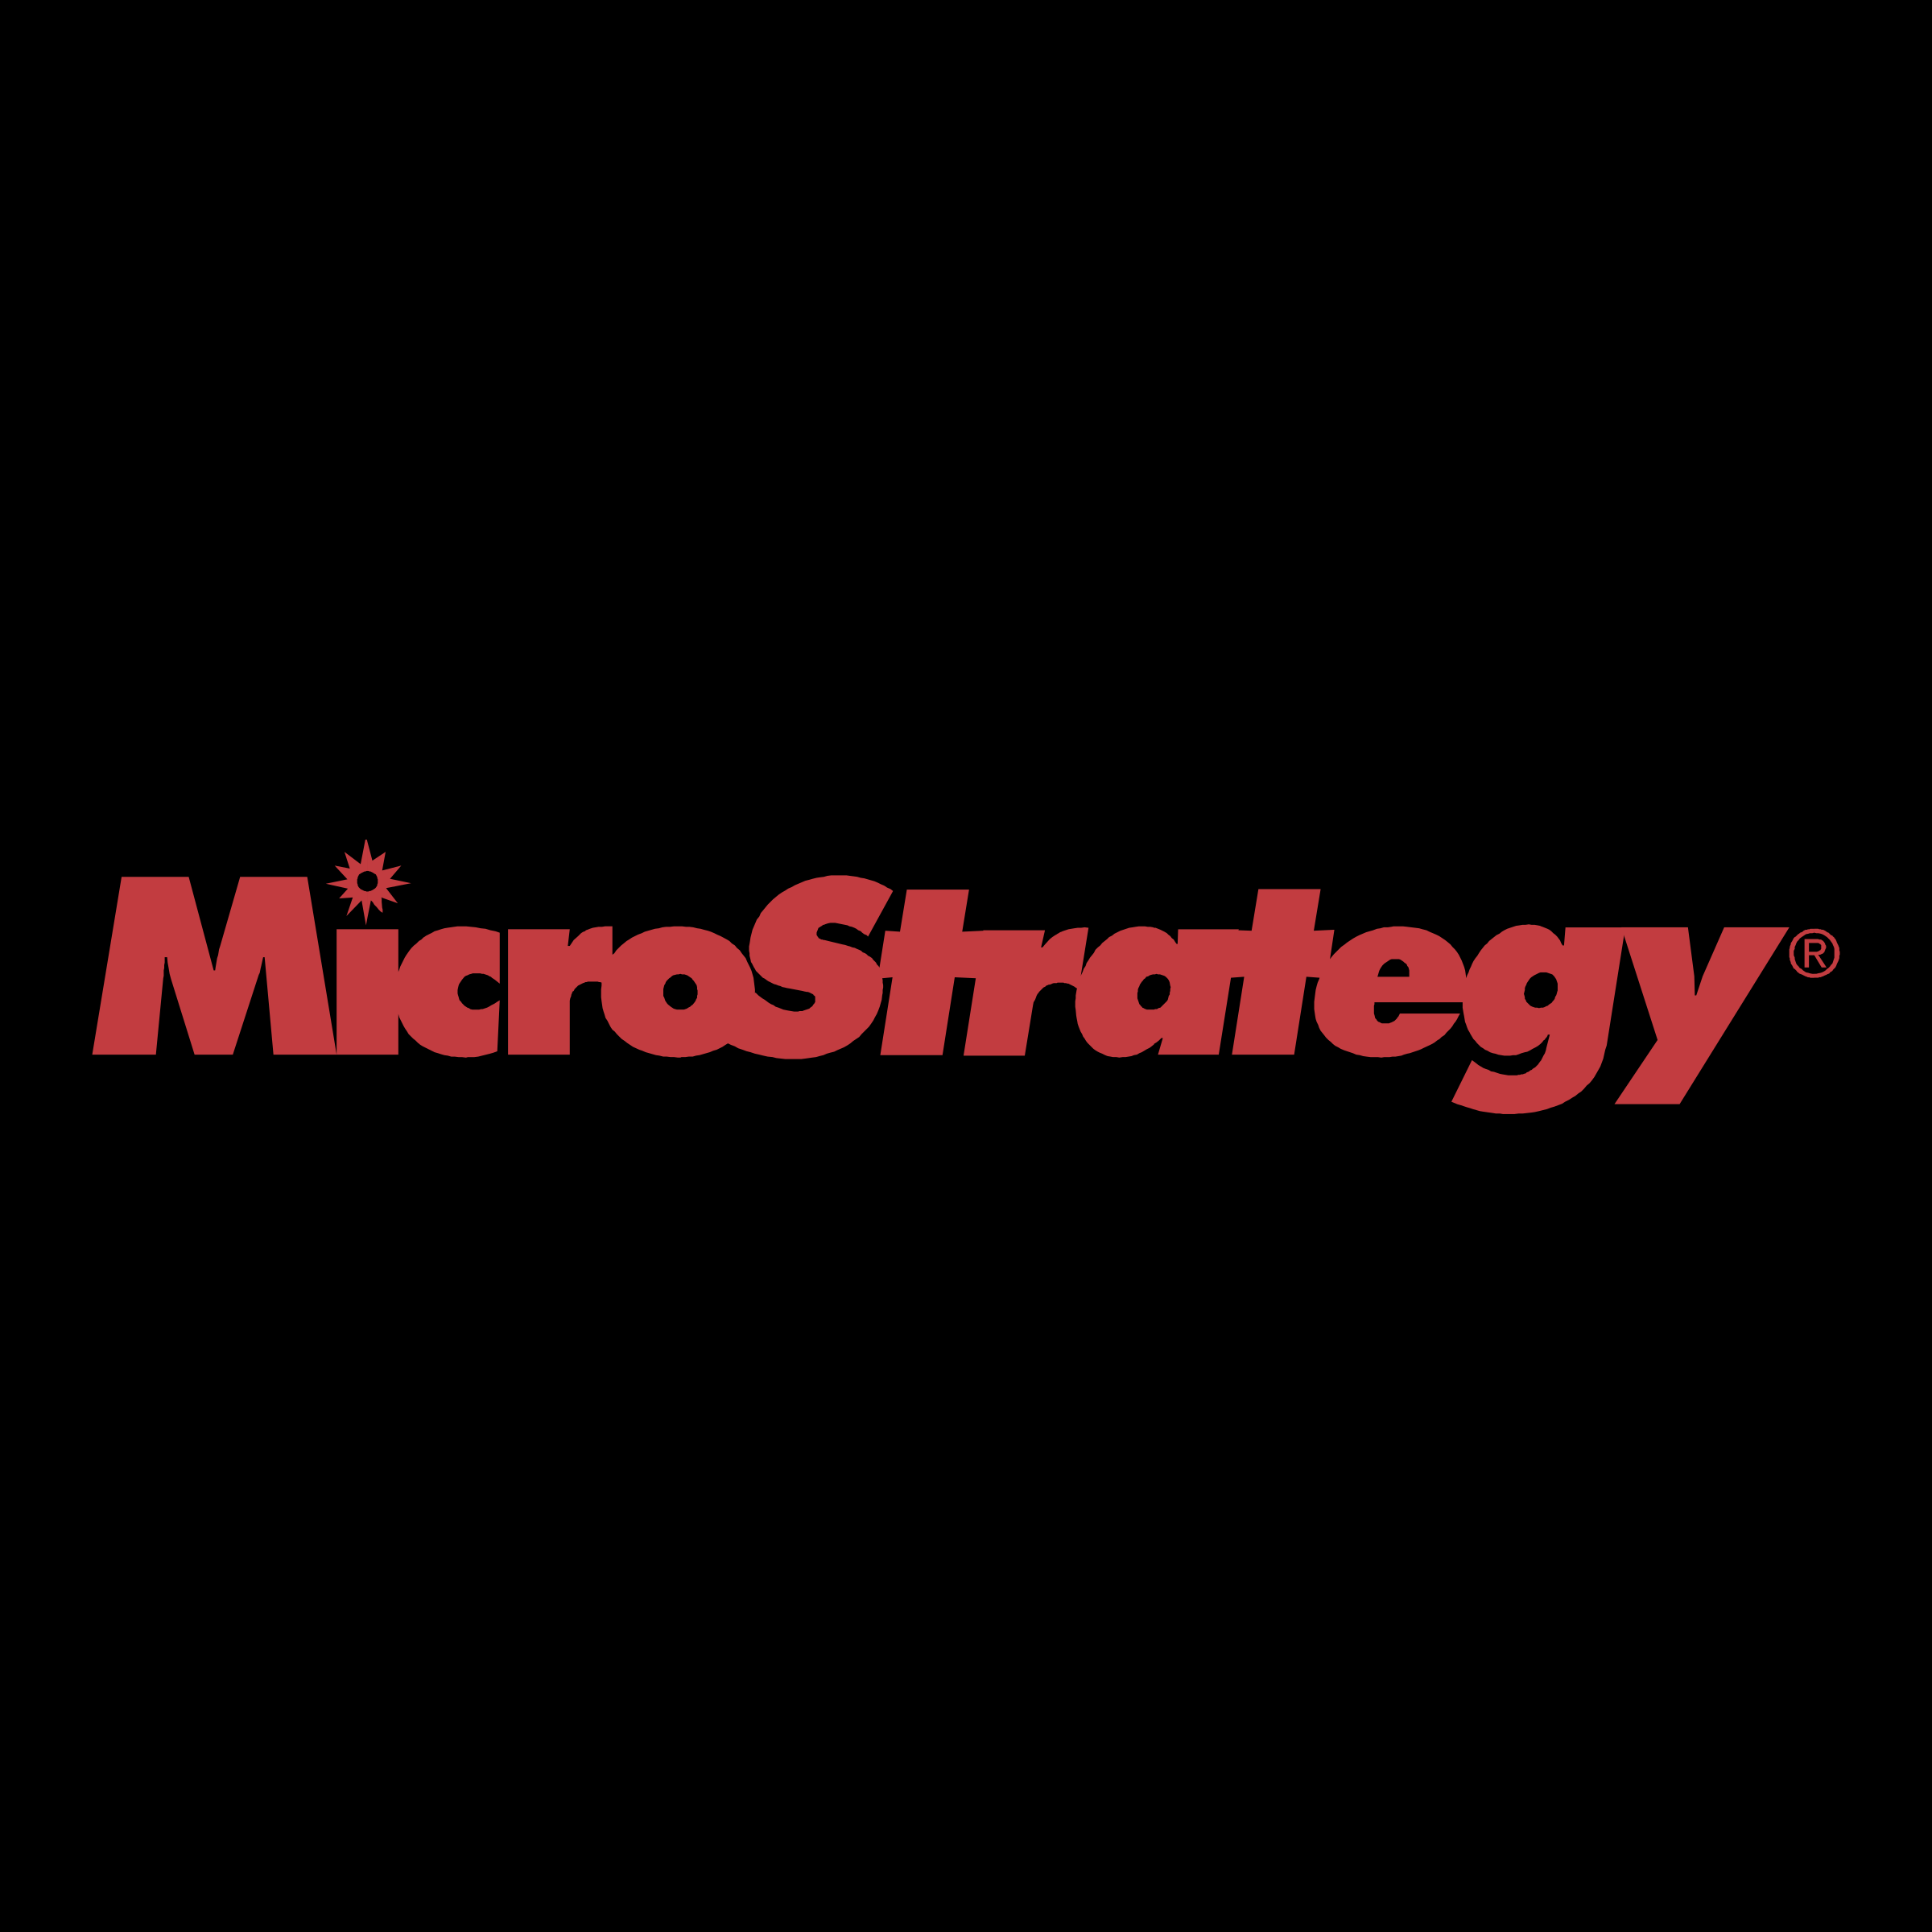 MicroStrategy Logo - MicroStrategy Logo PNG Transparent & SVG Vector